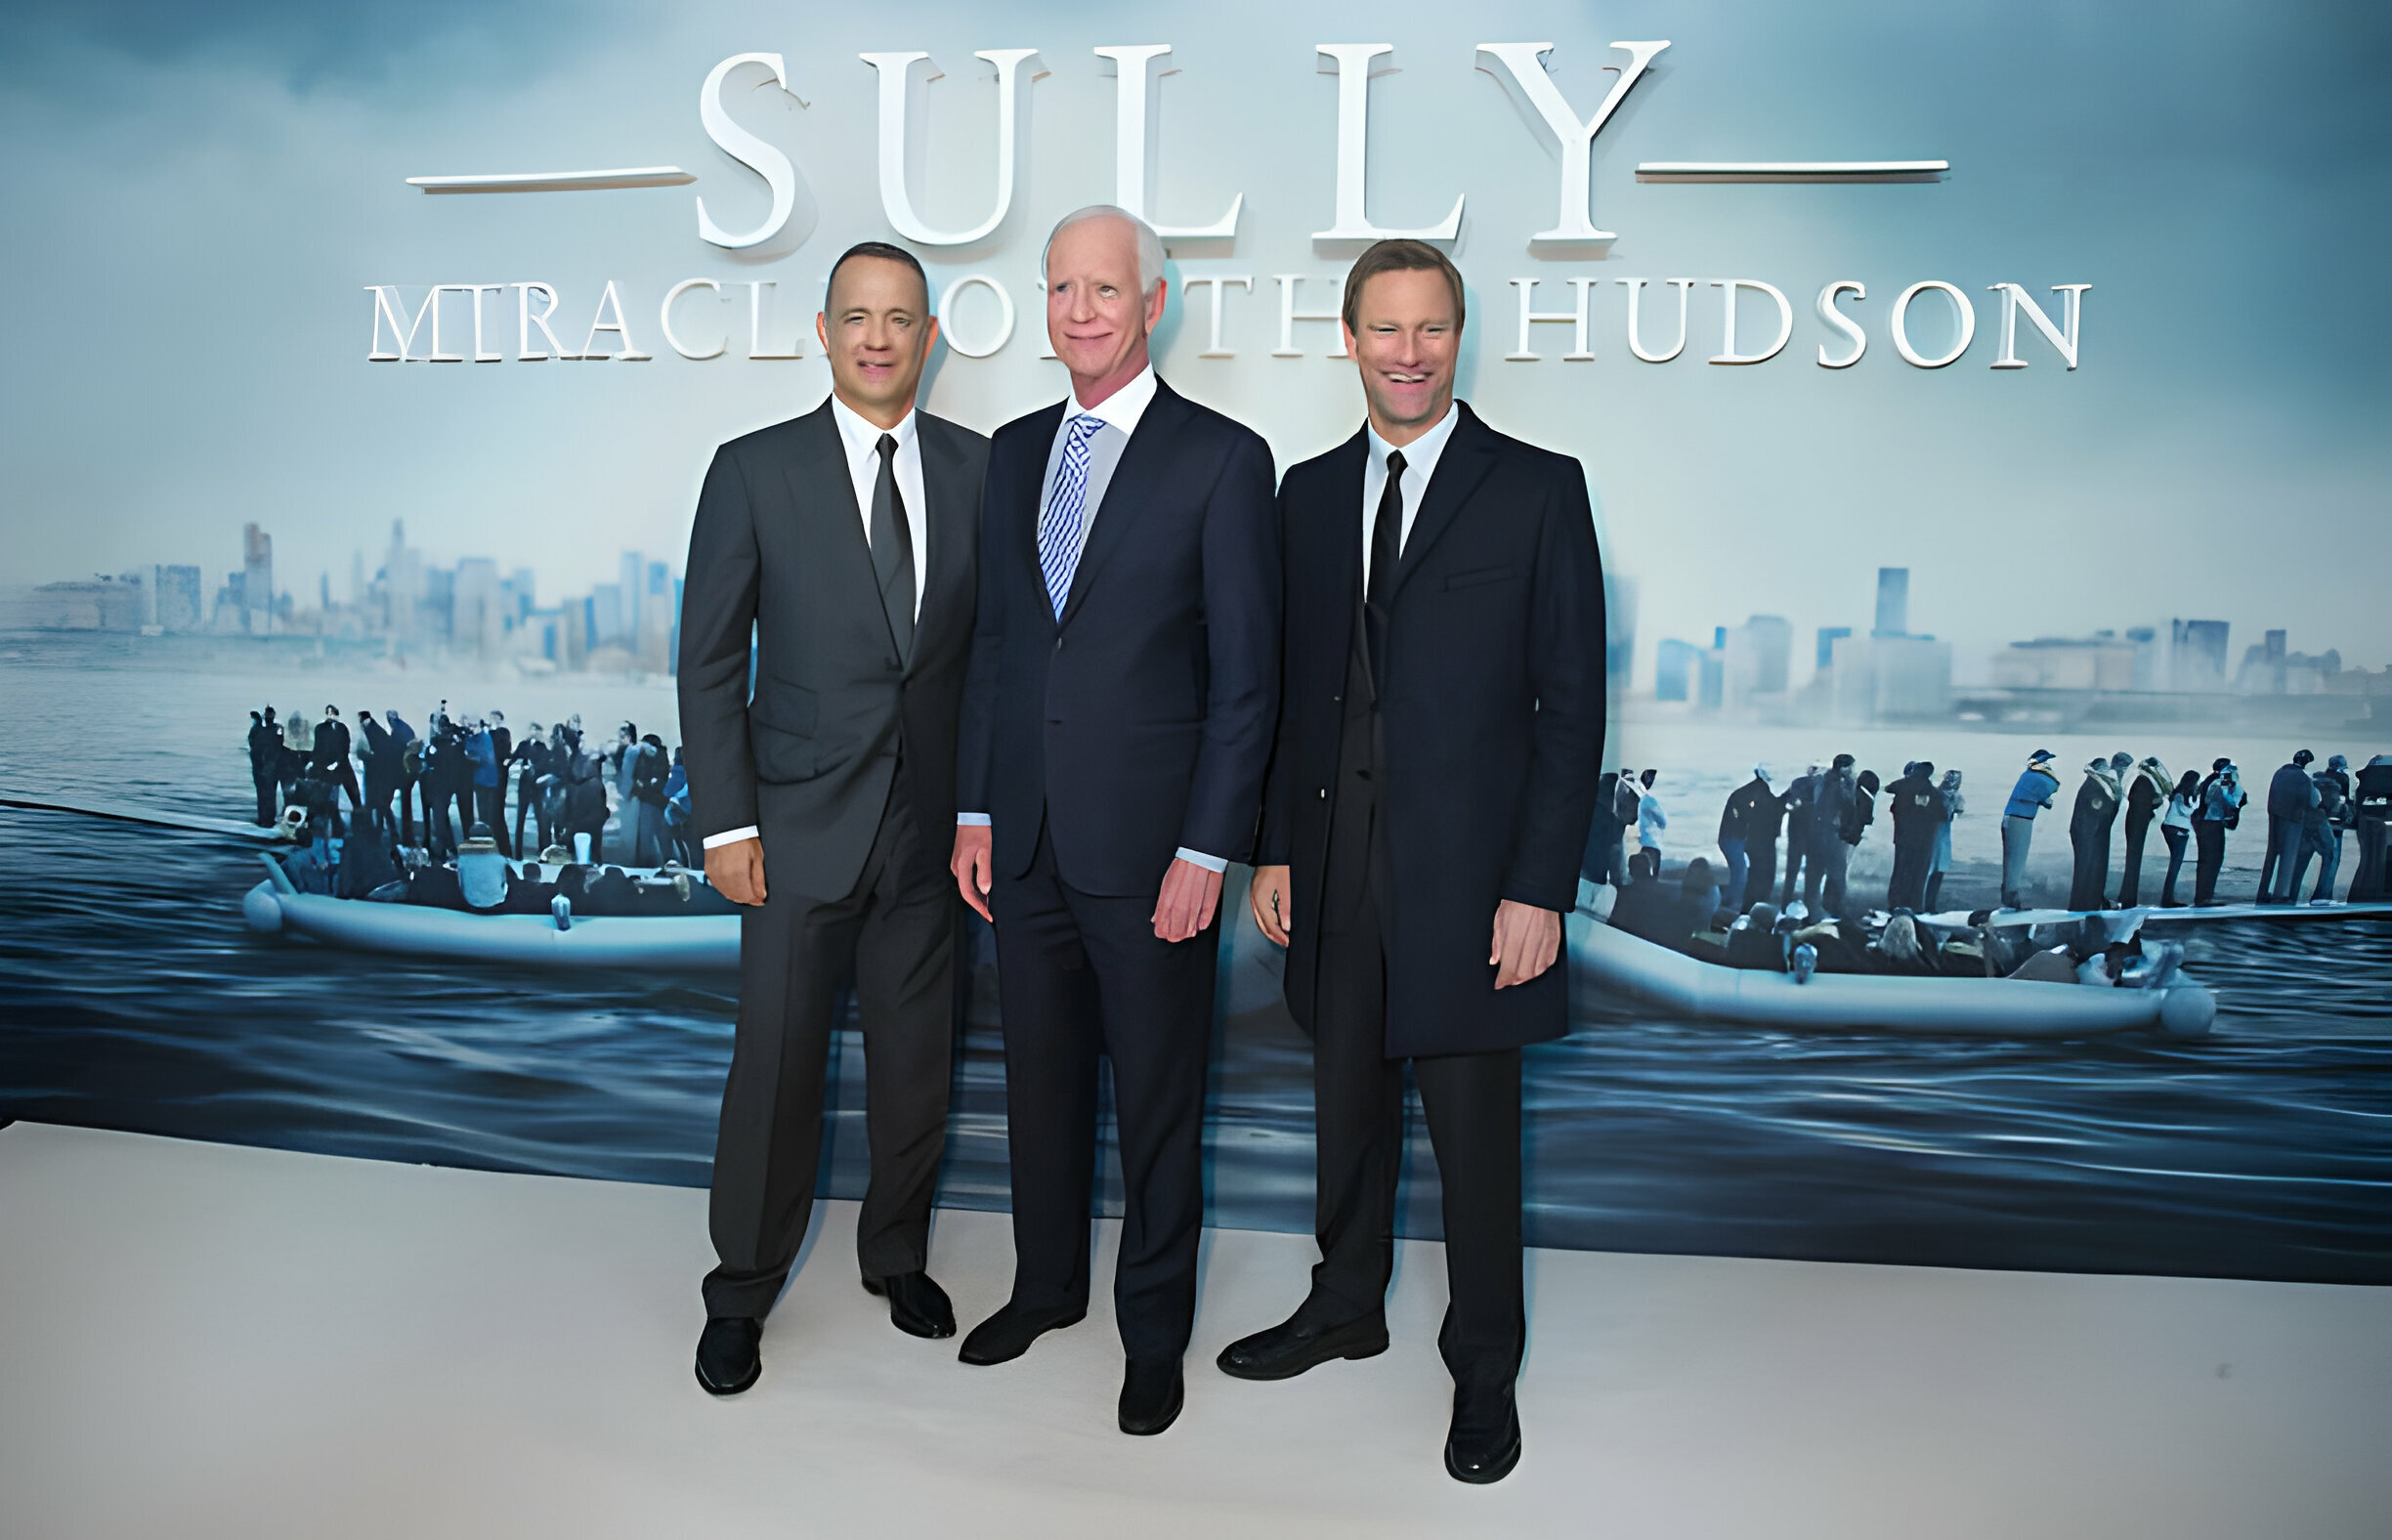 Sully Sullenberger's Net Worth